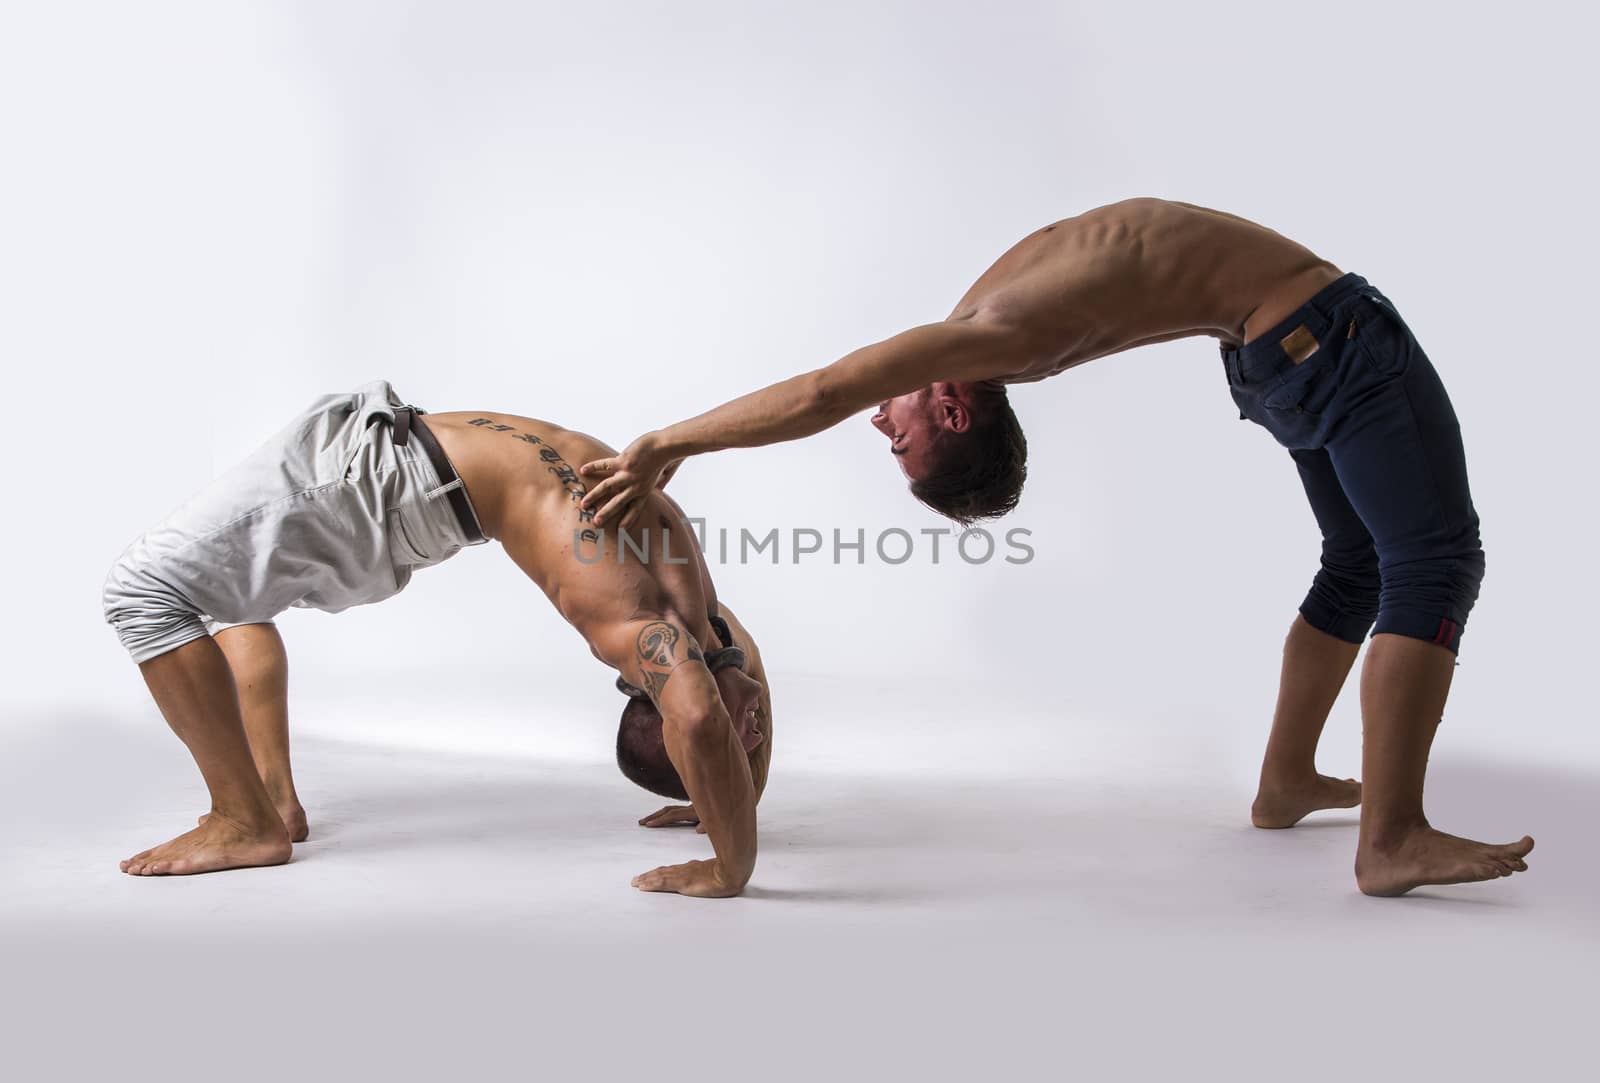 Muscular Shirtless Male Acrobatic Dancers Balancing on Top of Each Other in Studio with White Background